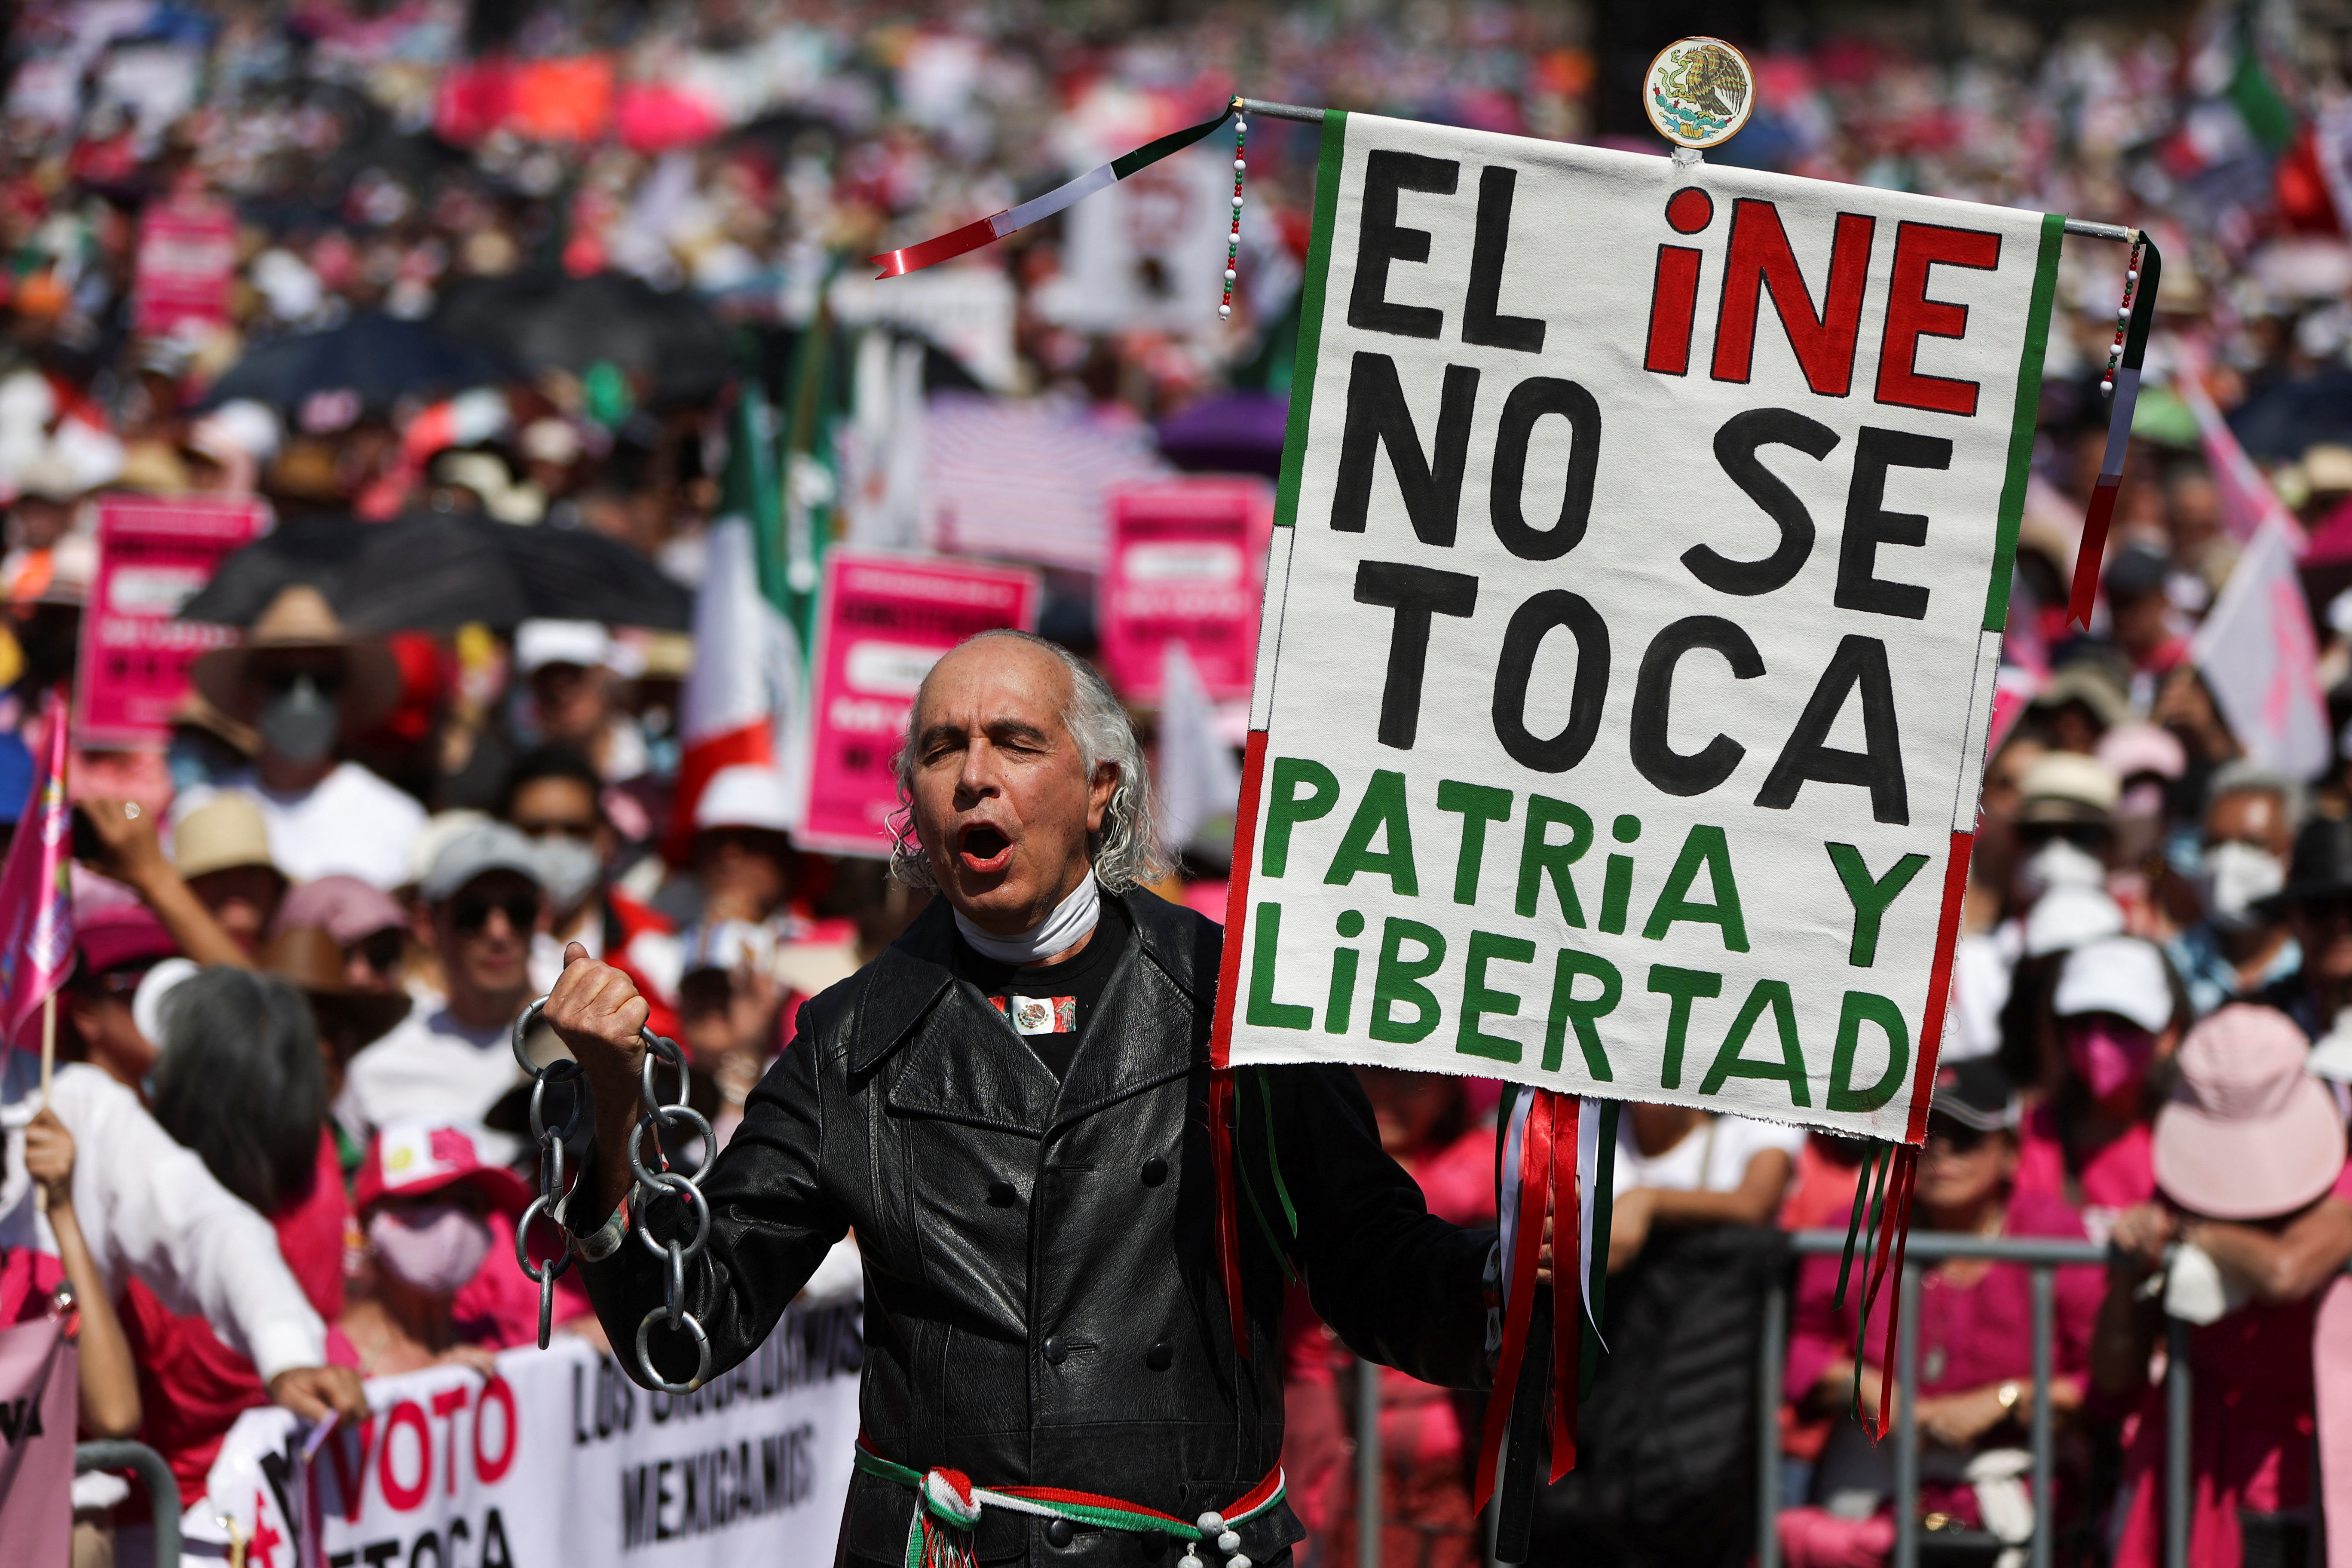 Protests in Mexico City in support of INE and against President Obrador's plan to reform electoral authorities